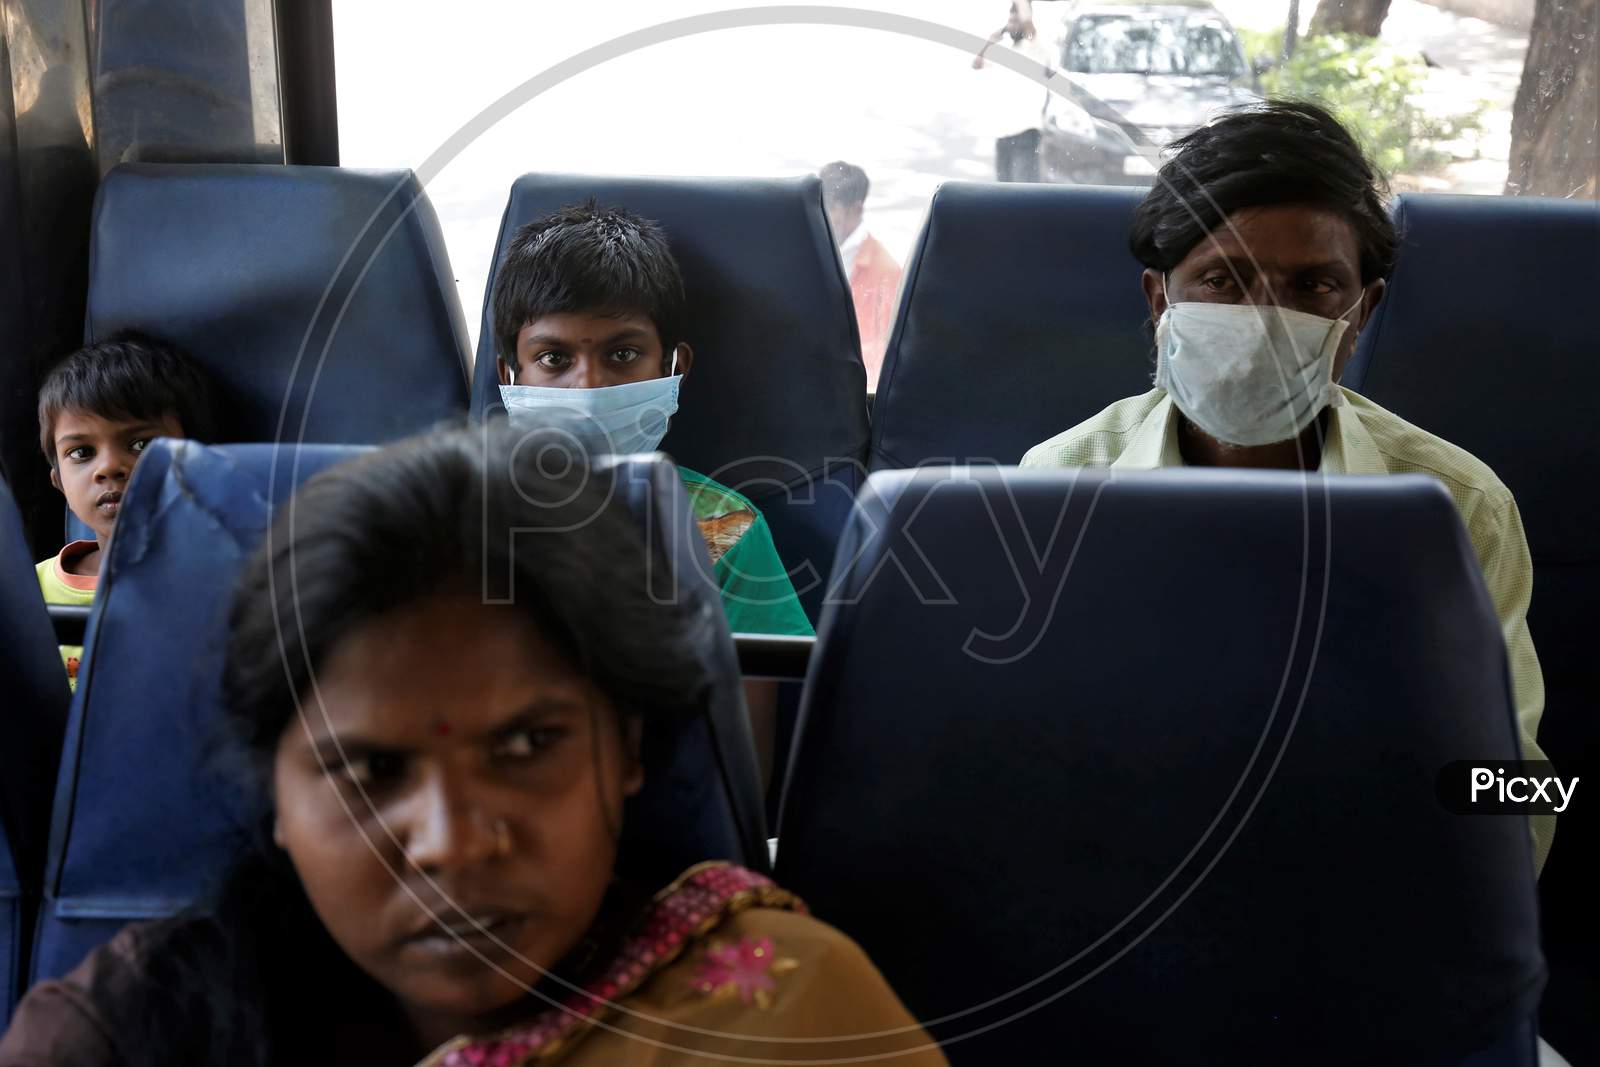 Migrant workers and their children sit in a bus before being repatriated to their villages by the government during a nationwide lockdown to prevent the spread of coronavirus (COVID-19) in Bangalore, India, April 30, 2020.